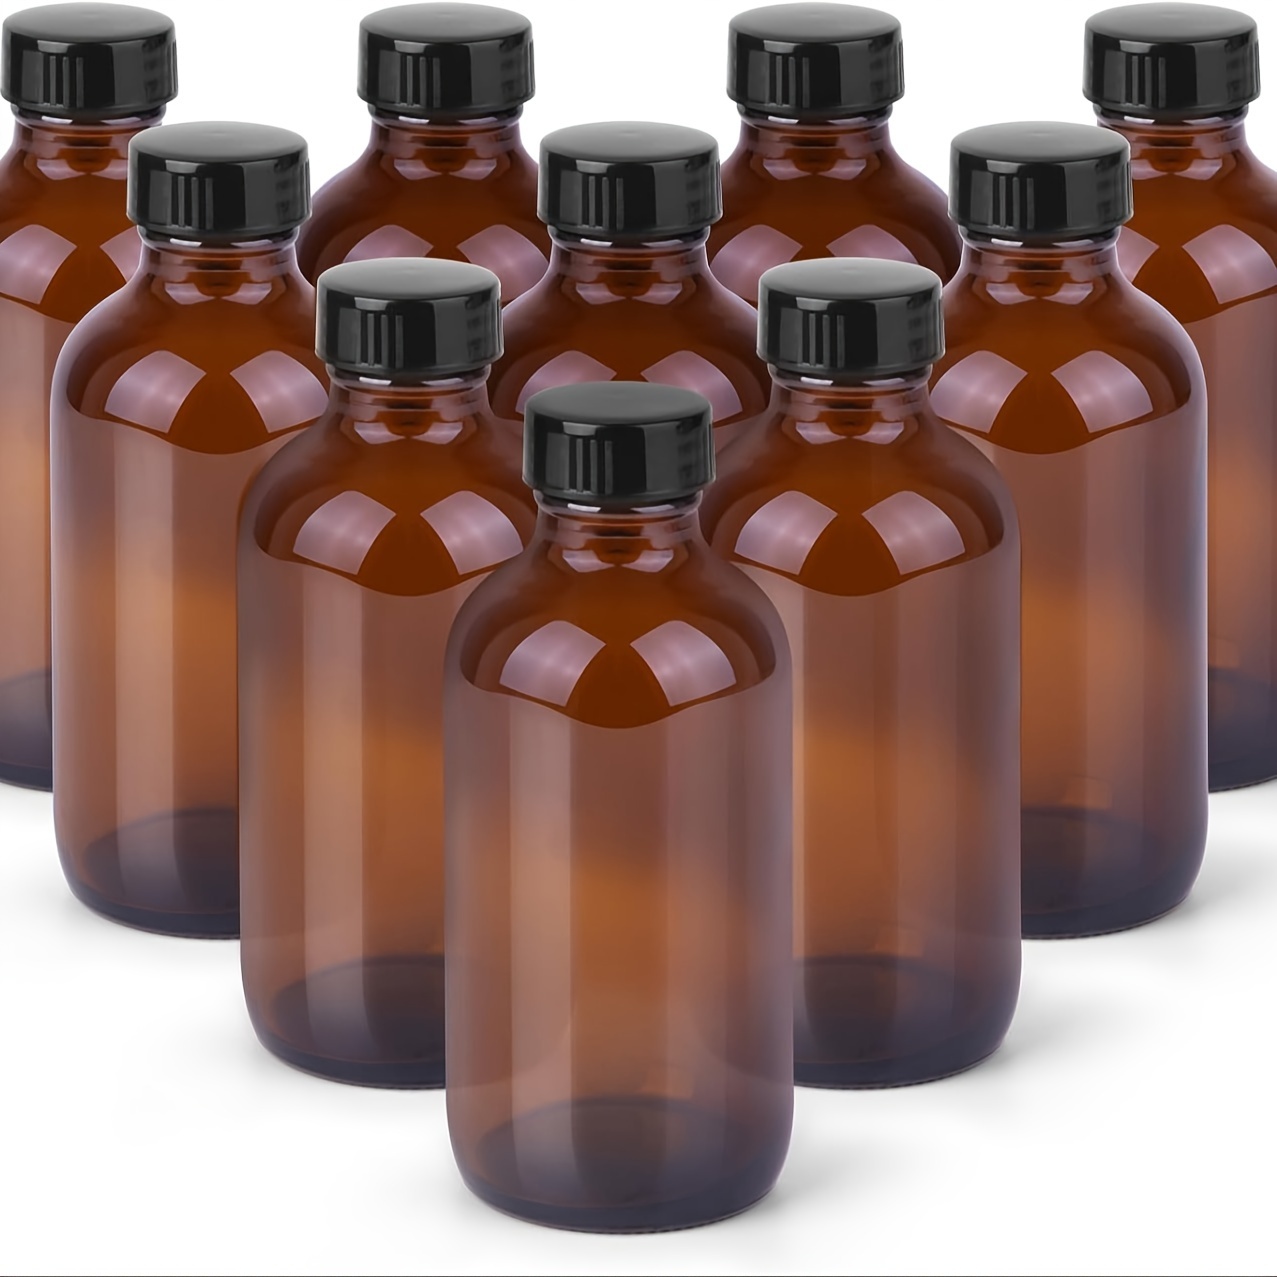 

10pcs Amber 4oz Small Glass Bottles With Lids And Funnels, 100ml Boston Round Glass Bottles, Leak Proof Mini Travel Bottles, Perfect For Diy Essential Oils, Hot Sauce And Juices